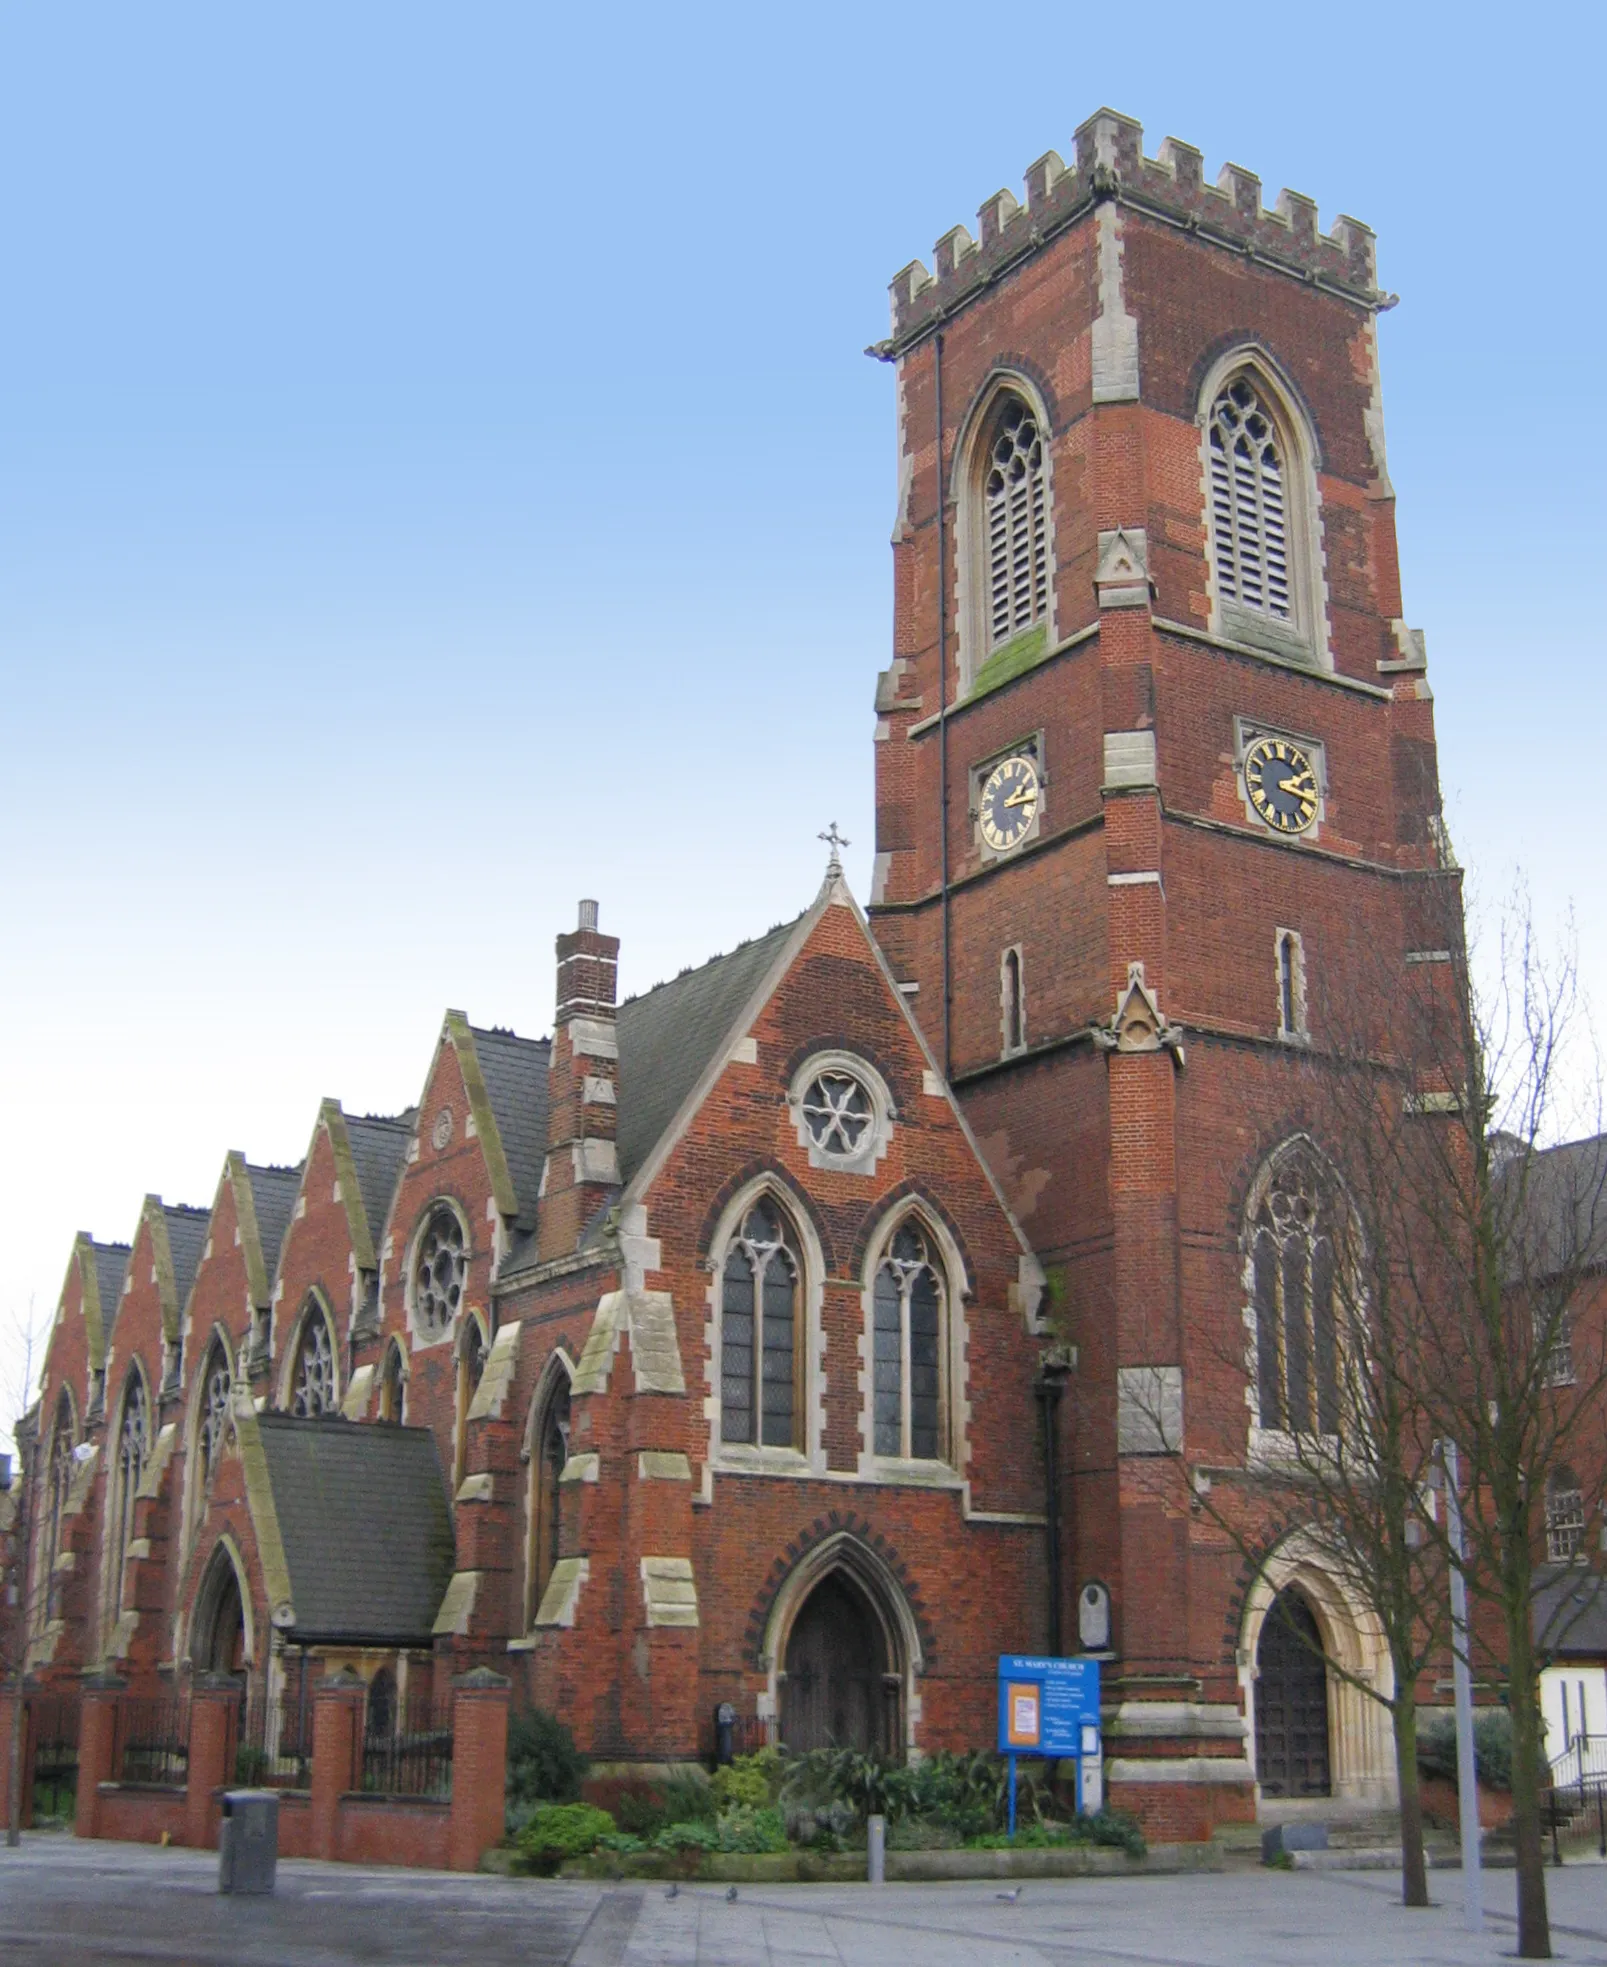 Photo showing: St Mary's parish church, Acton, London W3, seen from the northeast.
This image was originally on Wikipedia, and is being moved by its author under the same name.